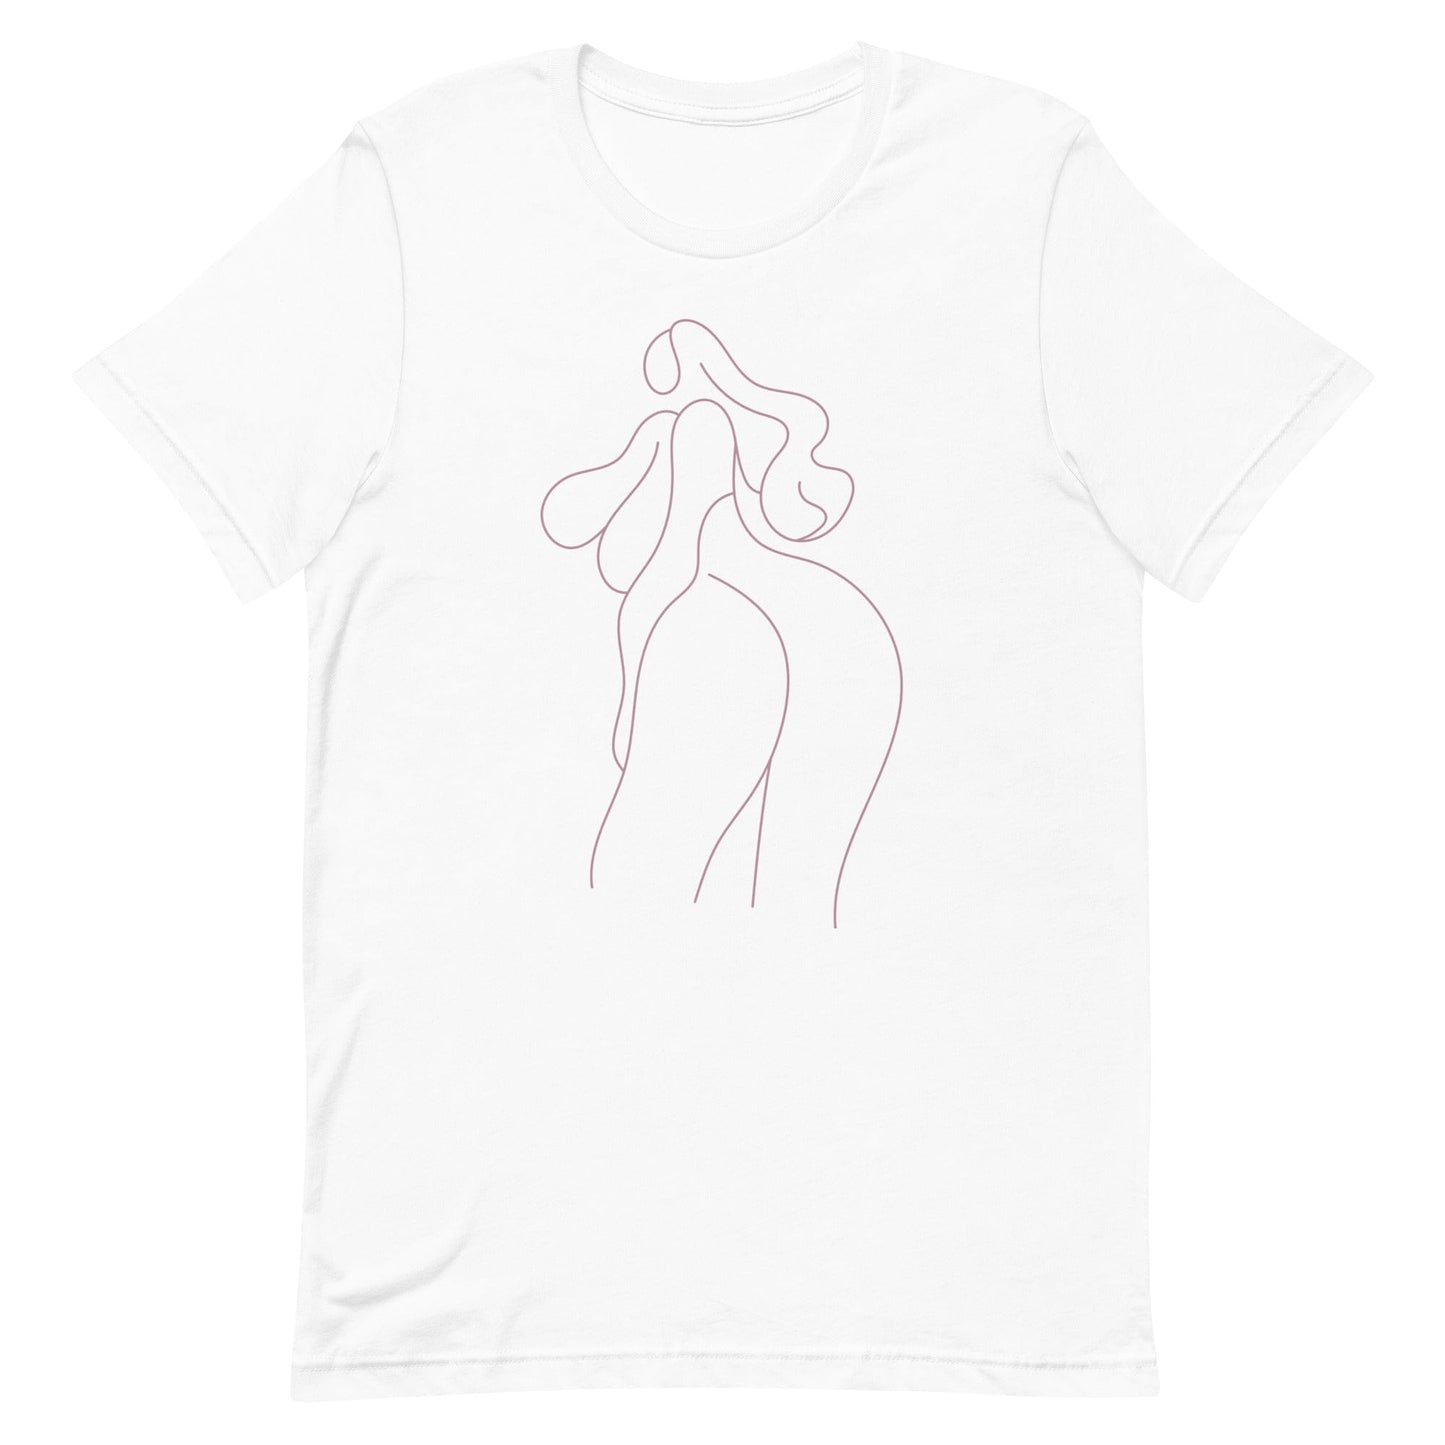 purple-drawing-female-body-tshirt-apparel-at-feminist-define-white-front